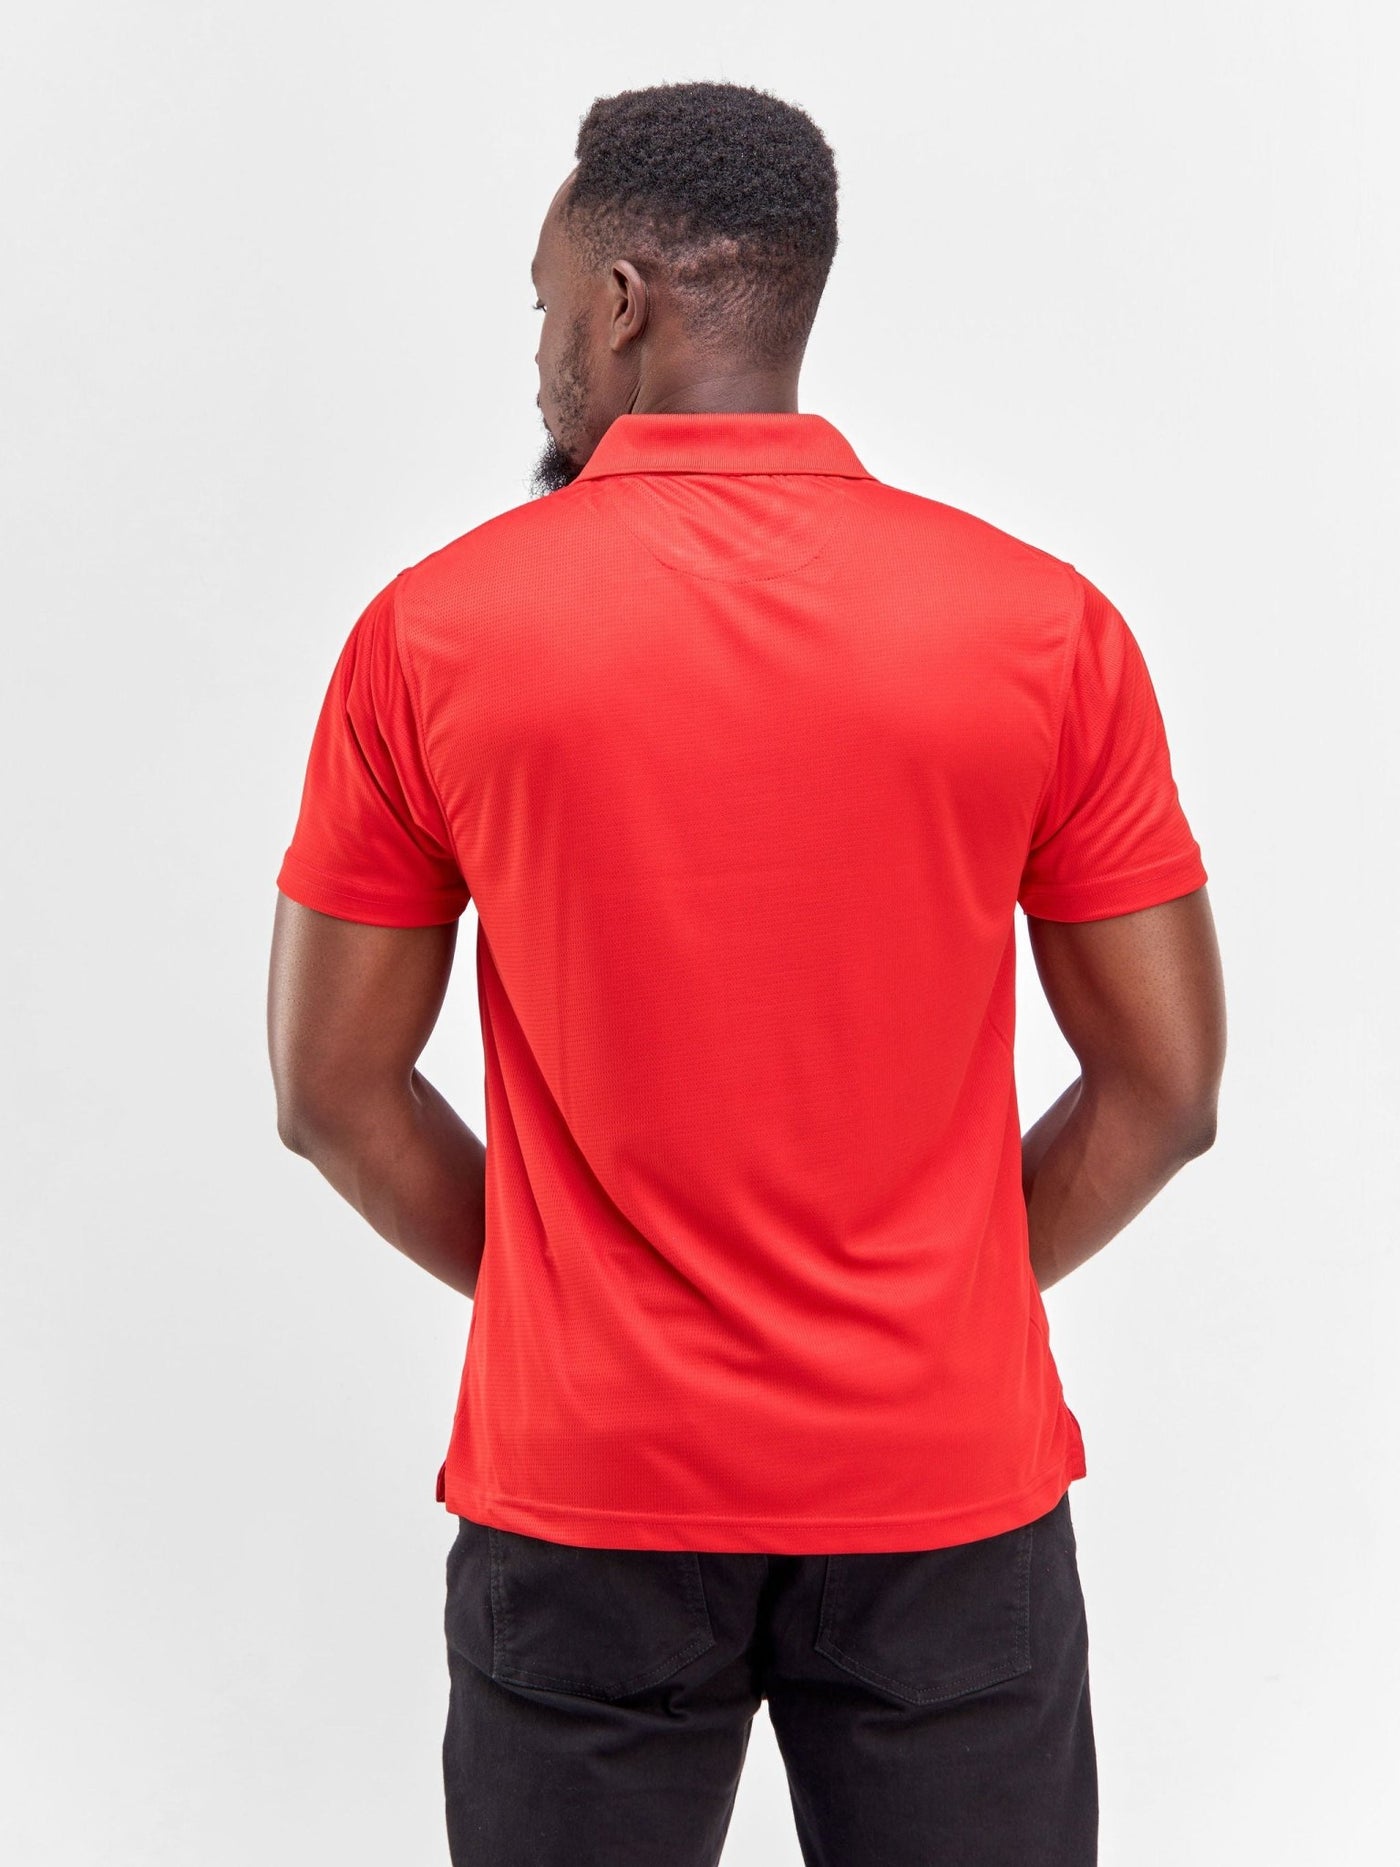 King's Collection Golf polo Shirt - Red - Shopzetu